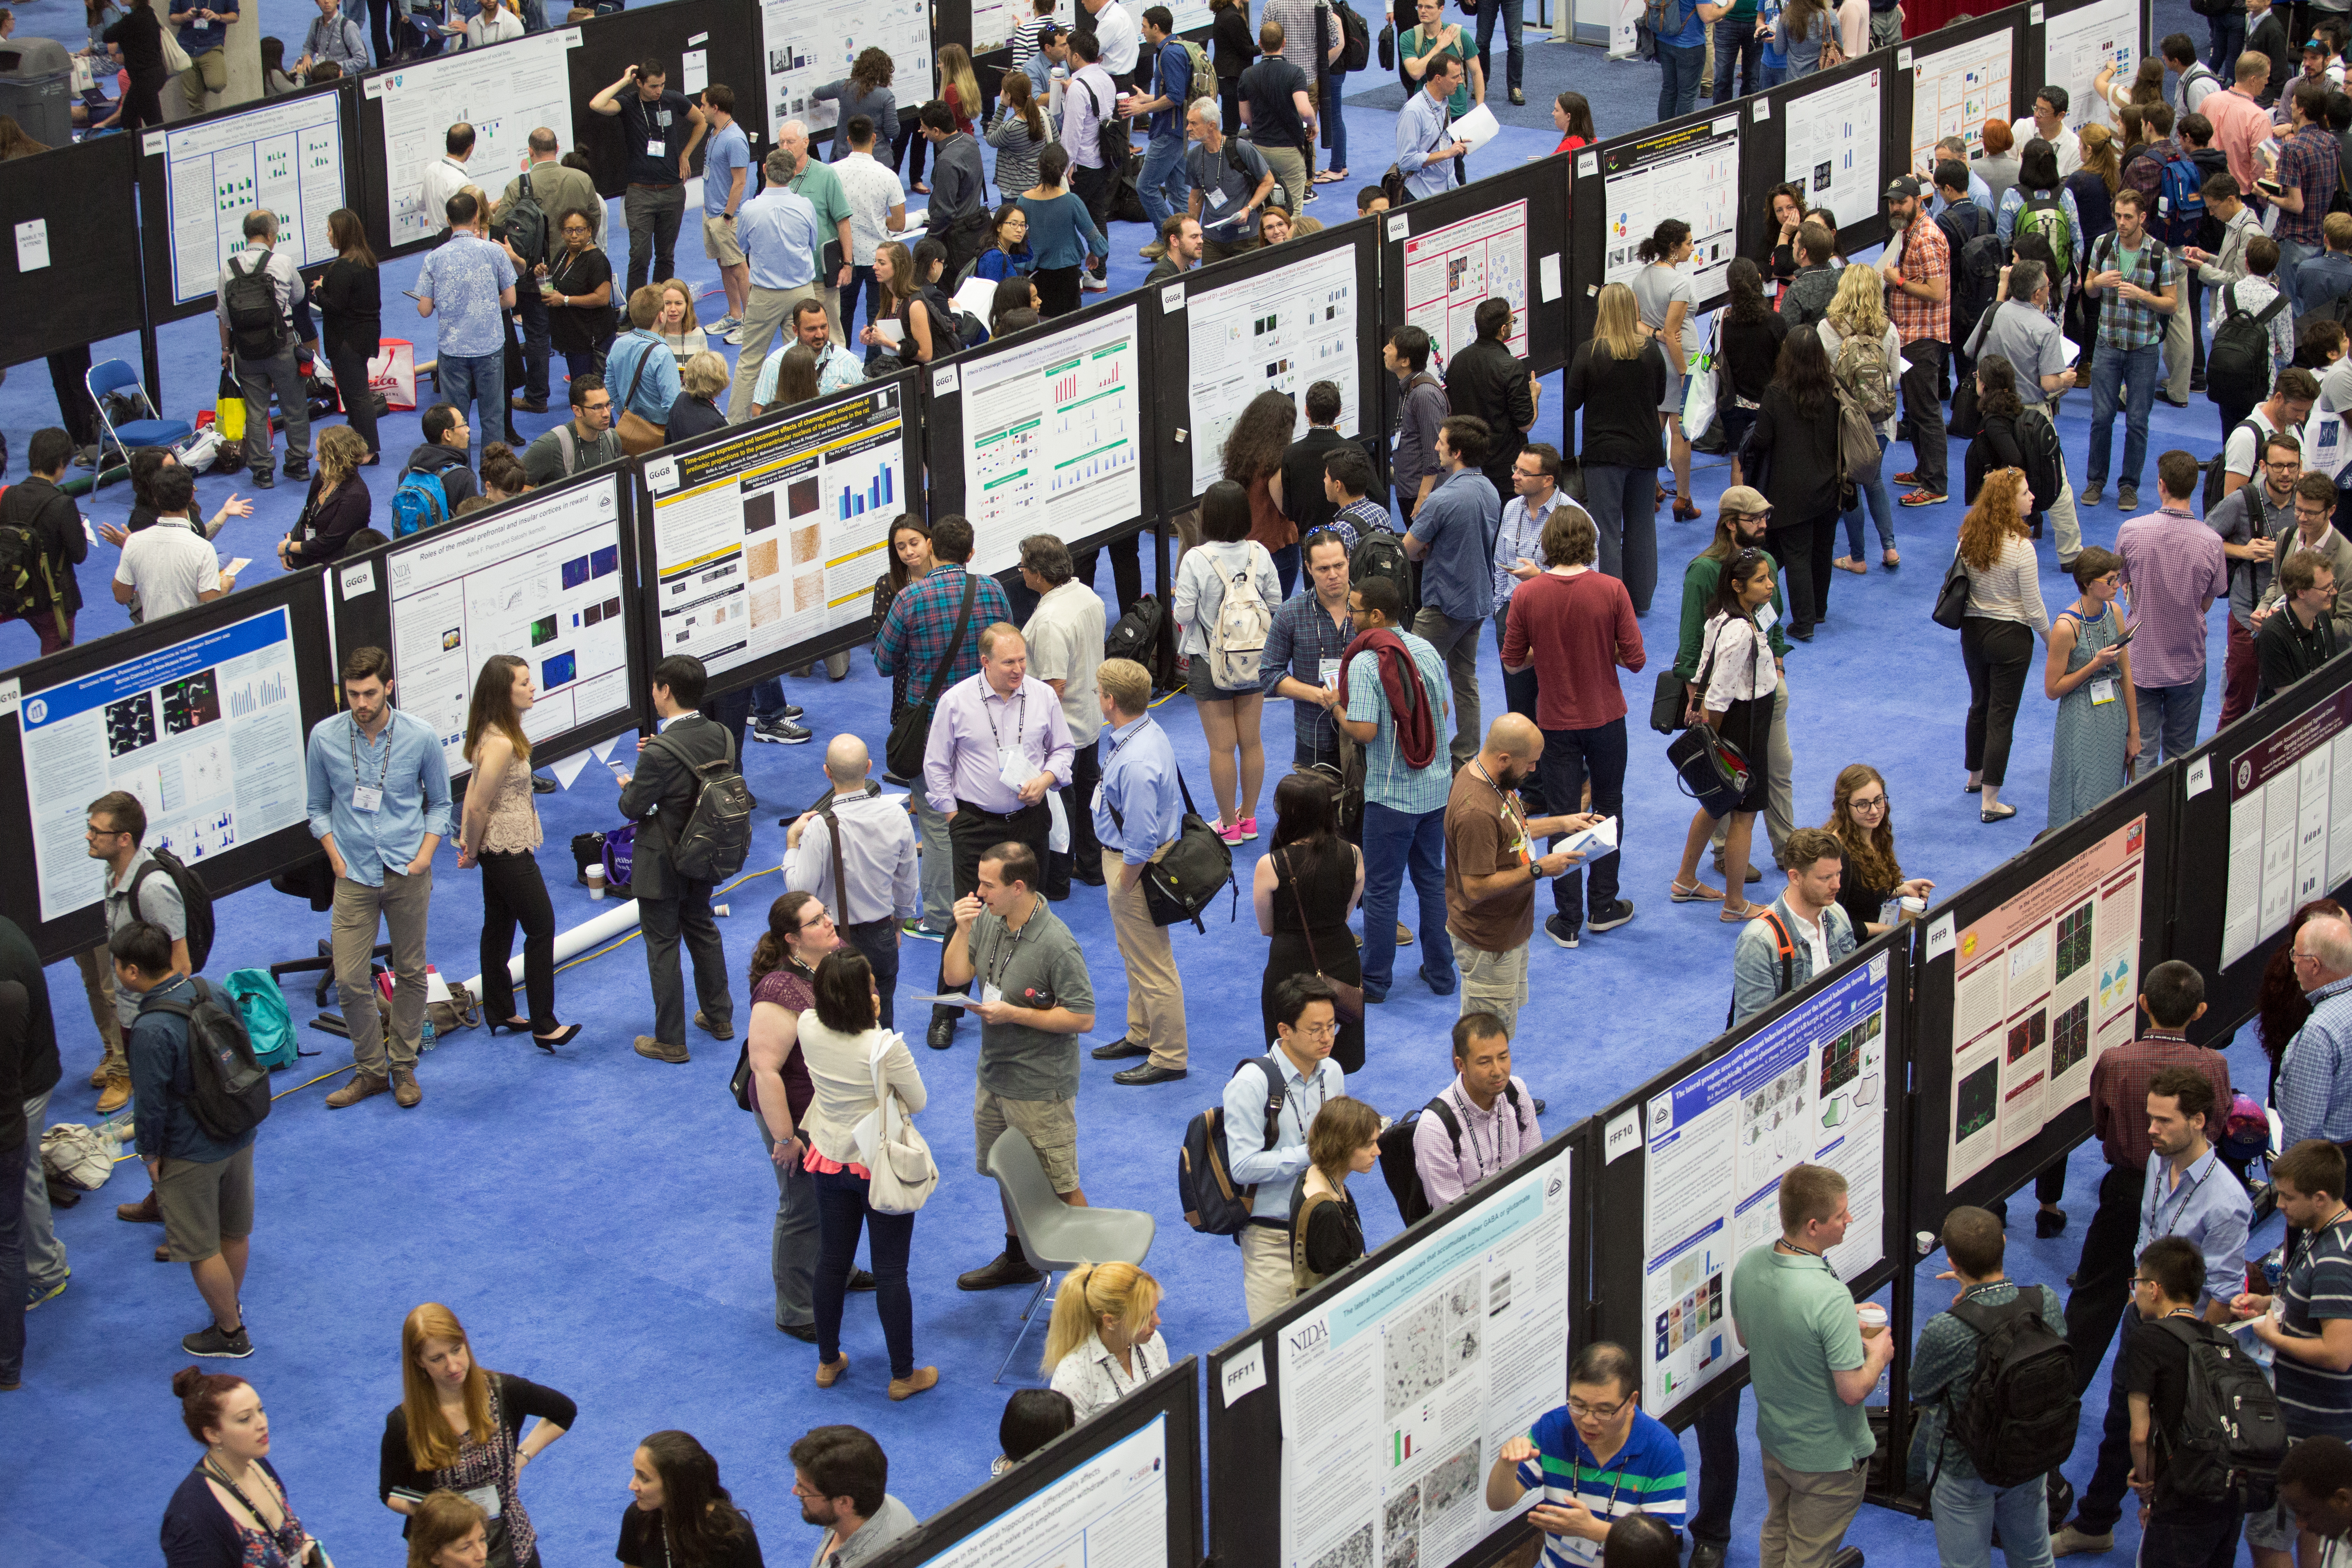 The crowded poster floor at the annual meeting